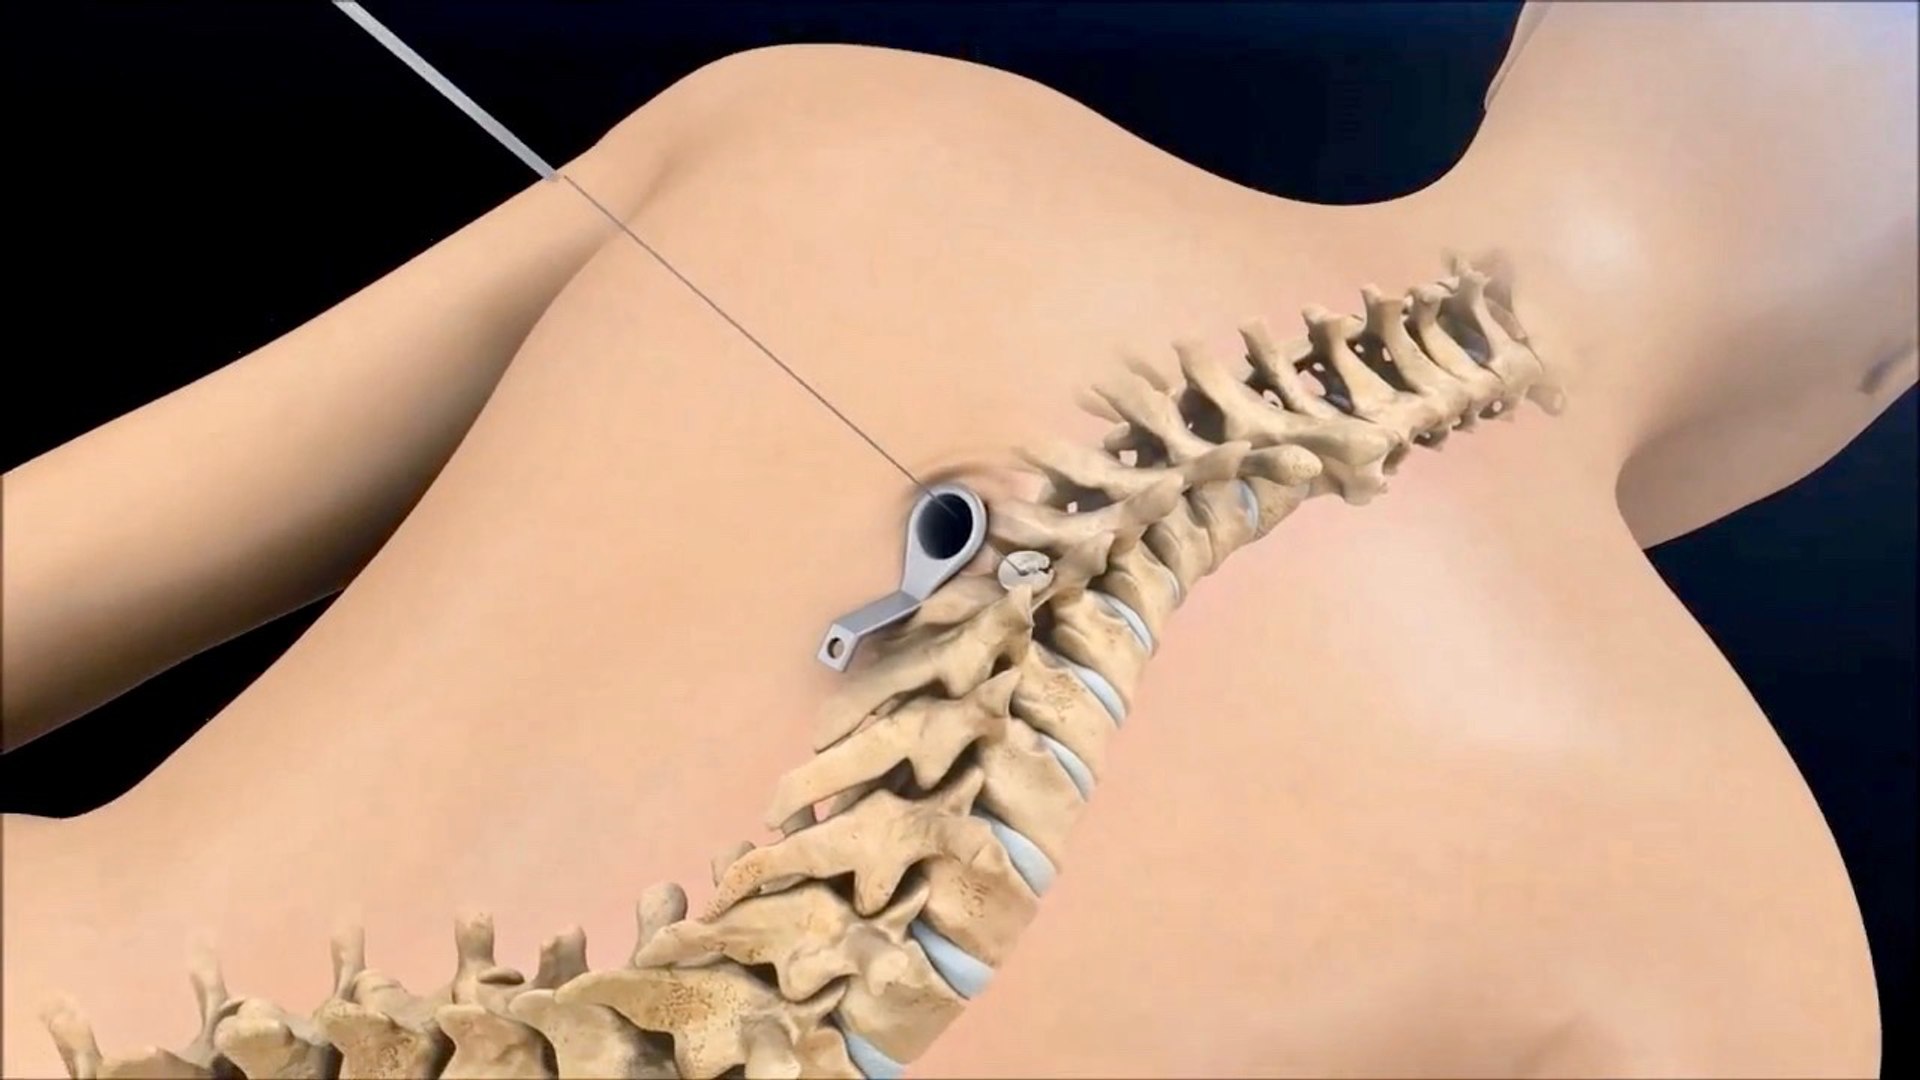 Amazing Surgery To Fix Curved Spine (Scoliosis) - Animation - video  Dailymotion